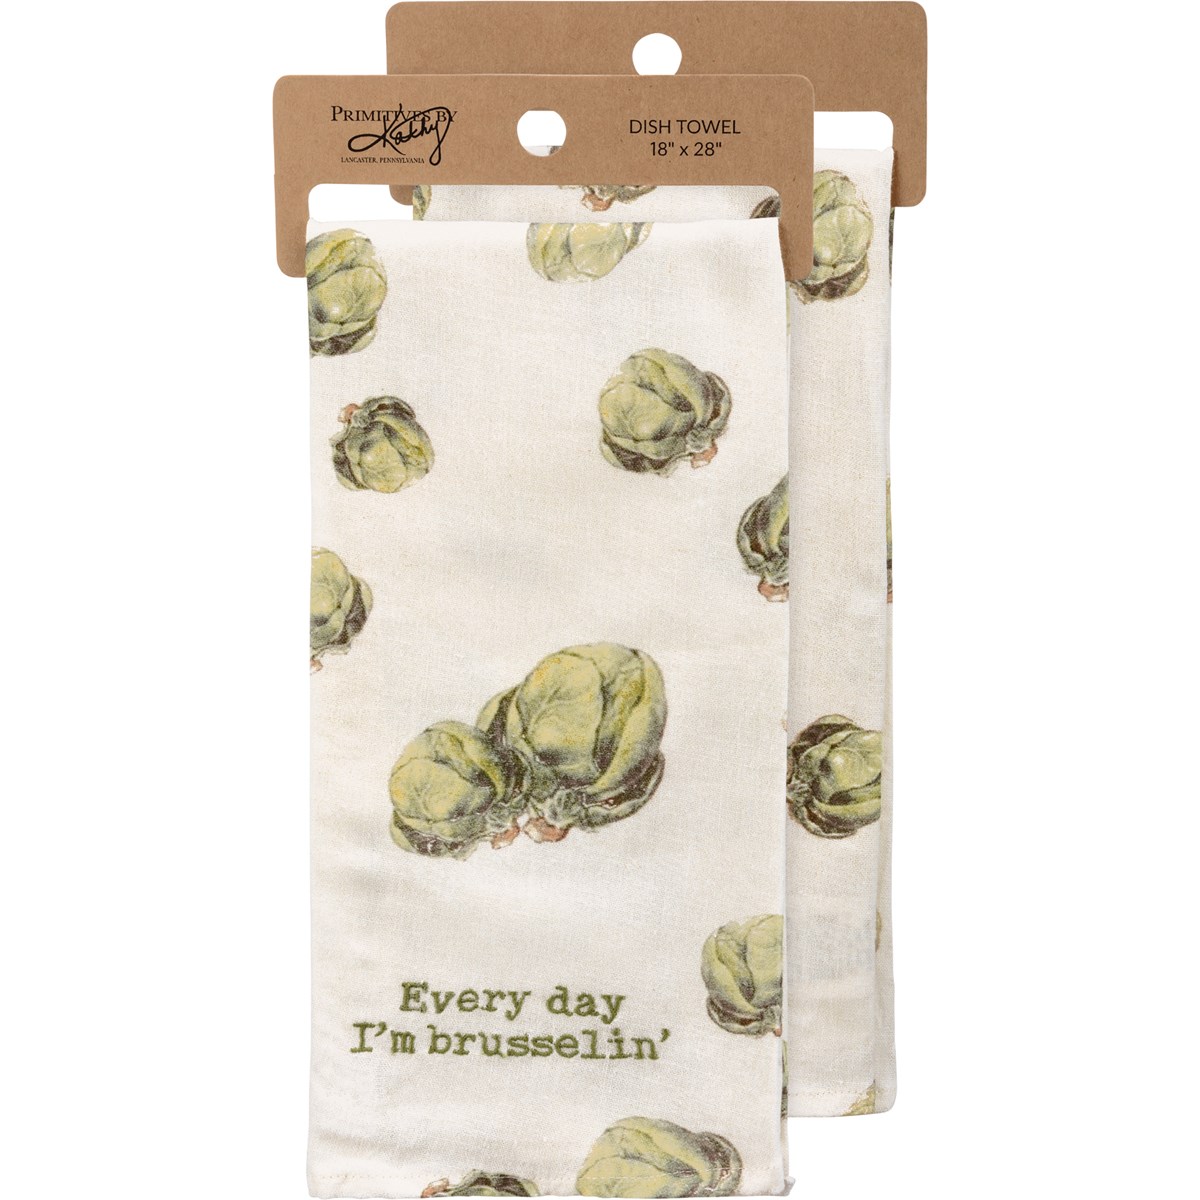 Kitchen Towel - Every Day I'm Brusselin' - 18" x 28" - Cotton, Linen